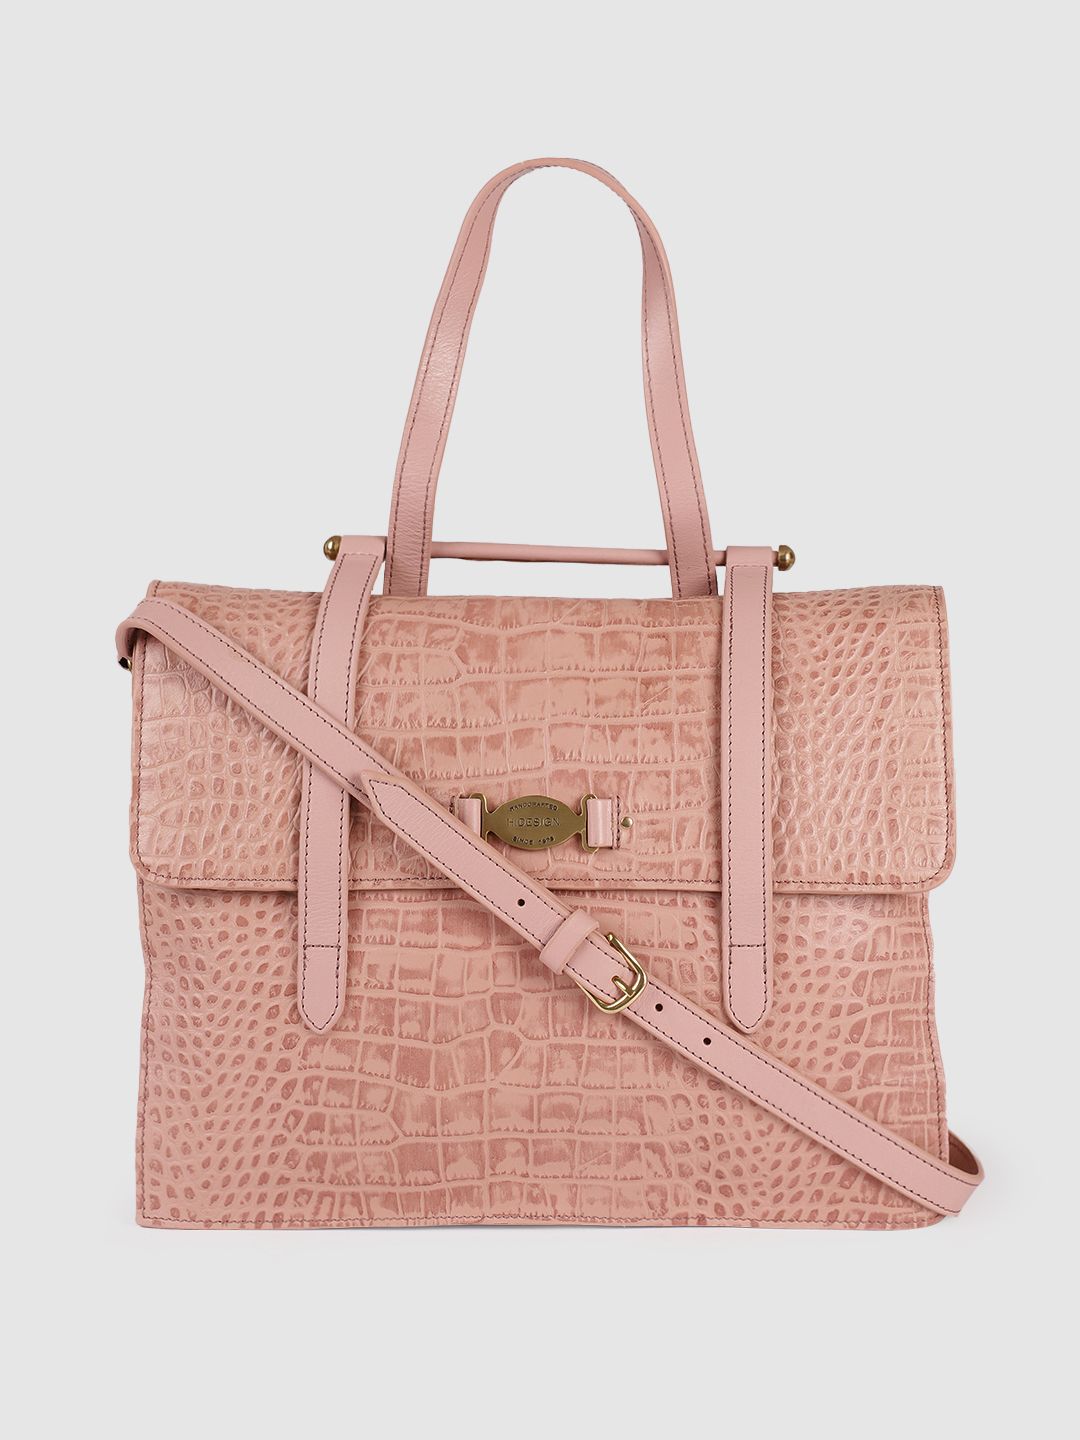 Hidesign Women Pink Textured Leather Handheld Bag Price in India